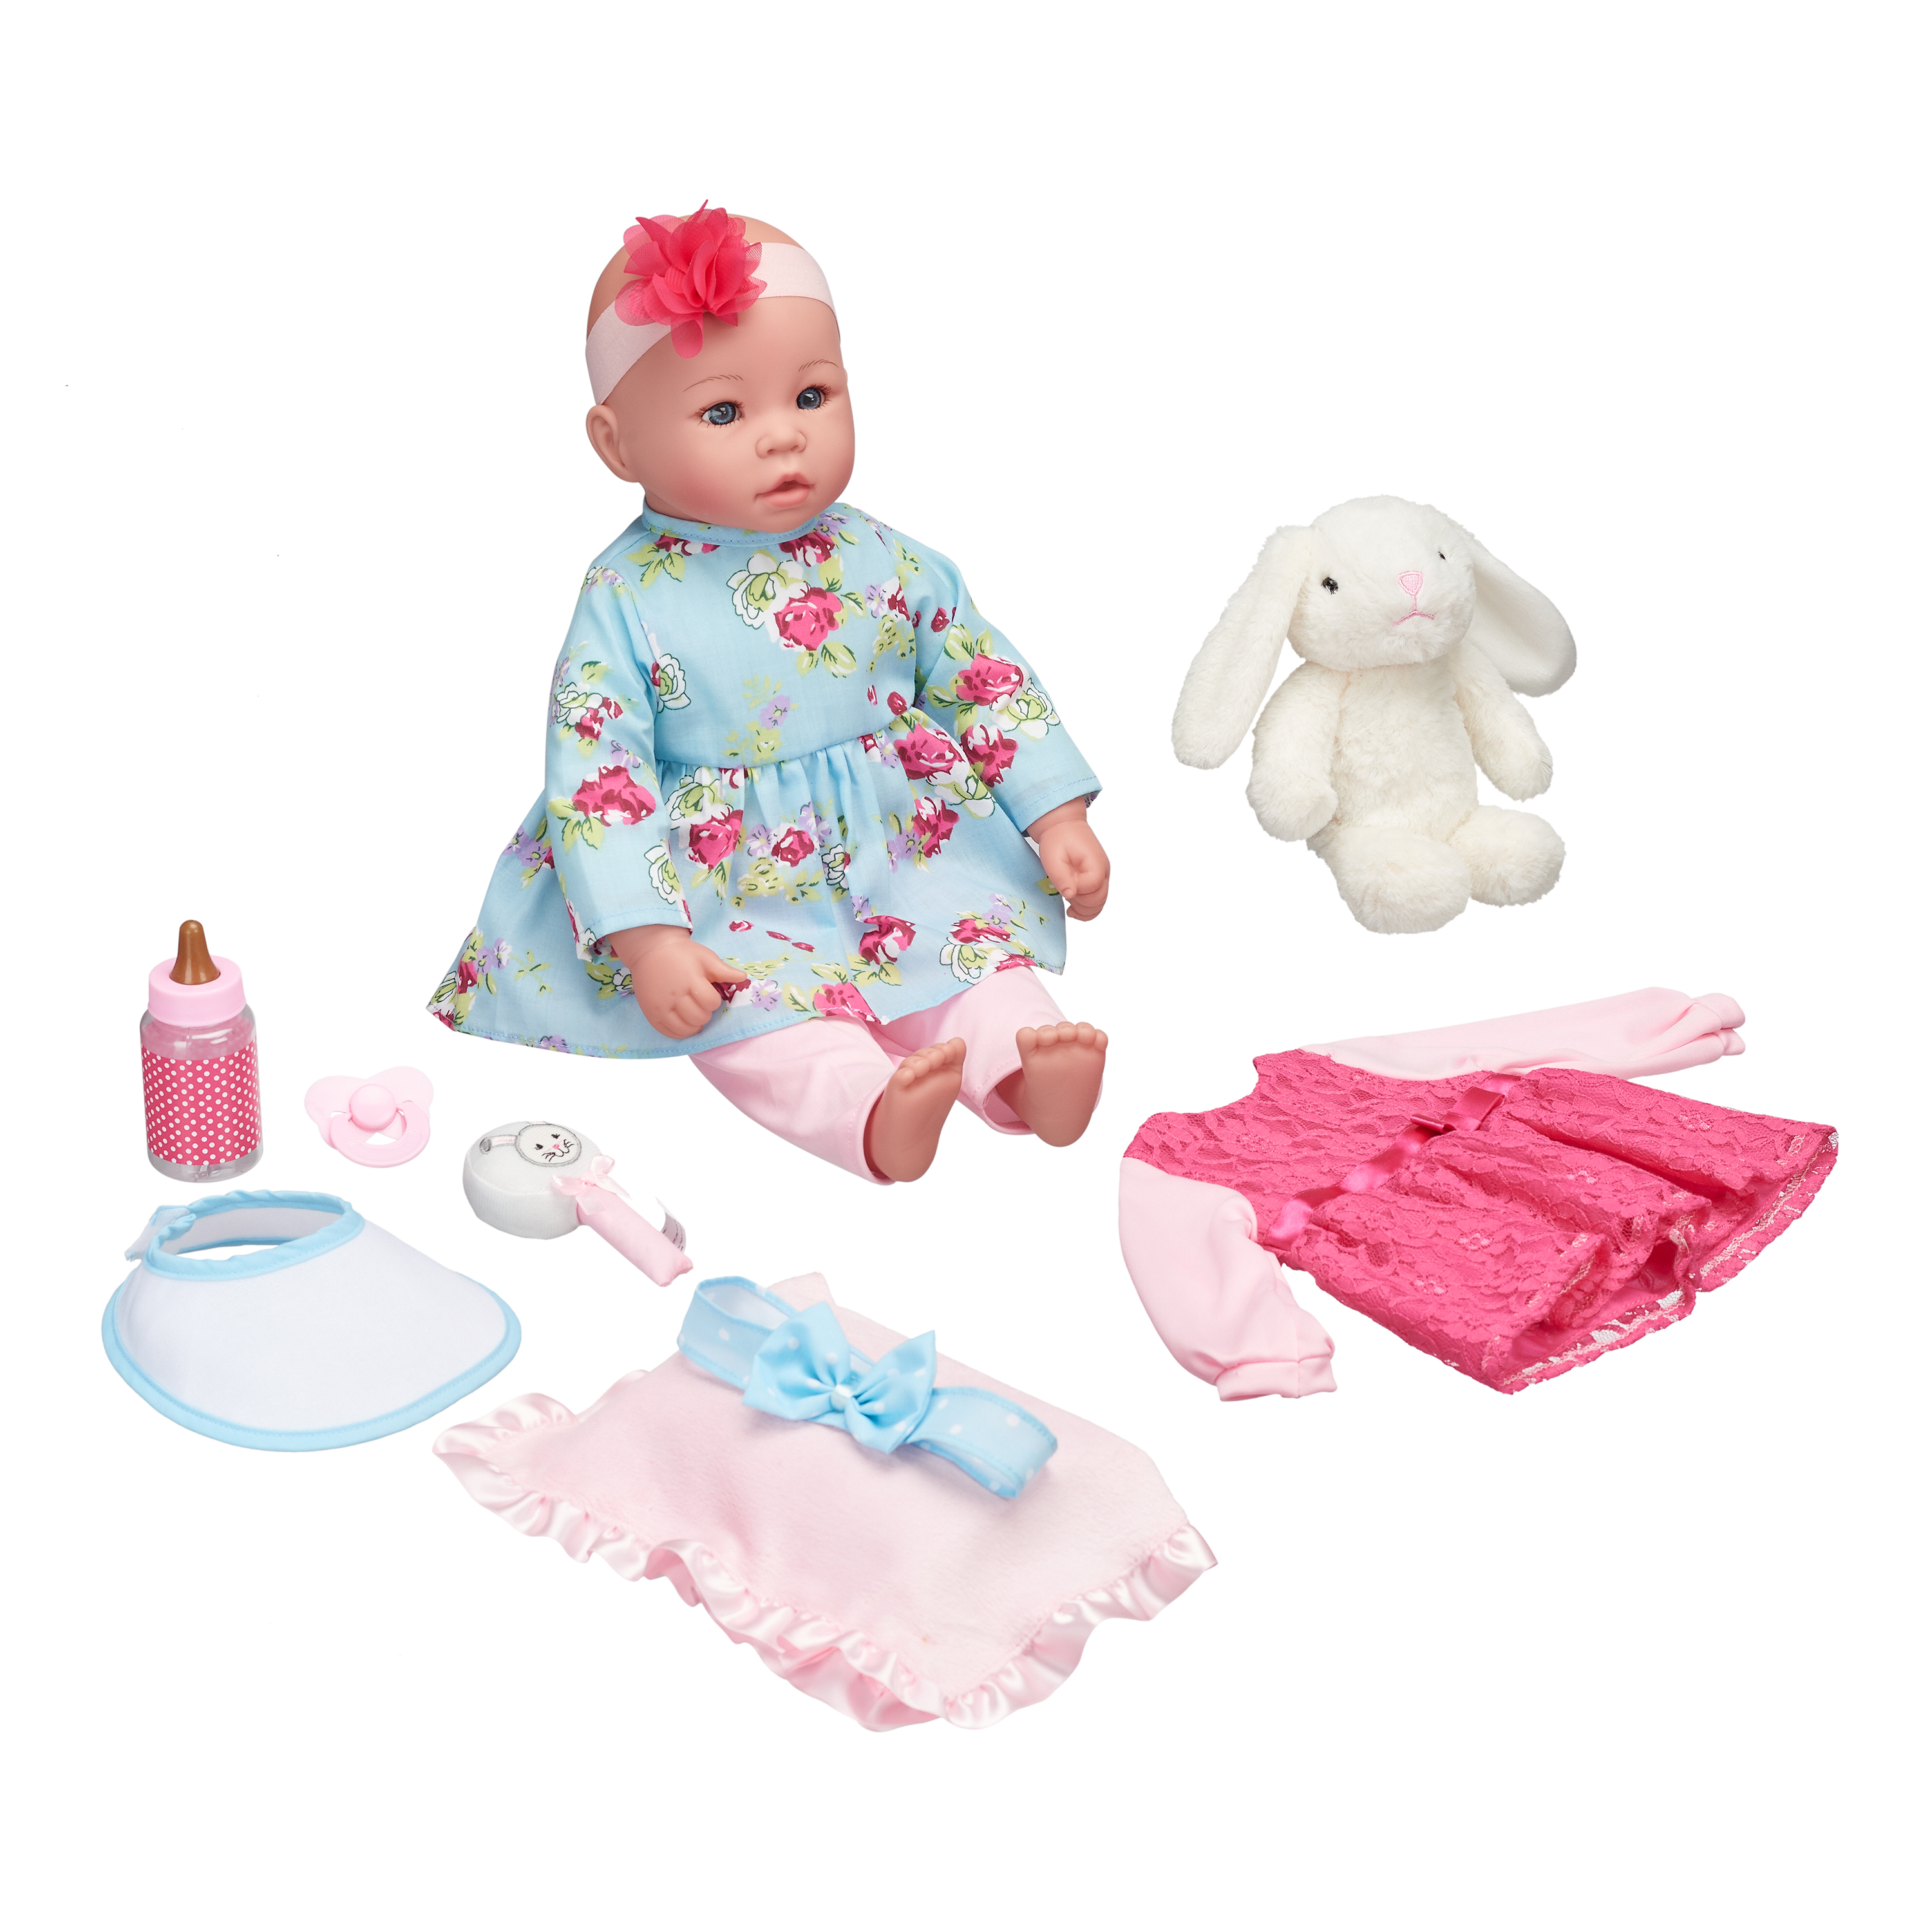 My Sweet Love 18" Doll and Accessories Set - image 1 of 4